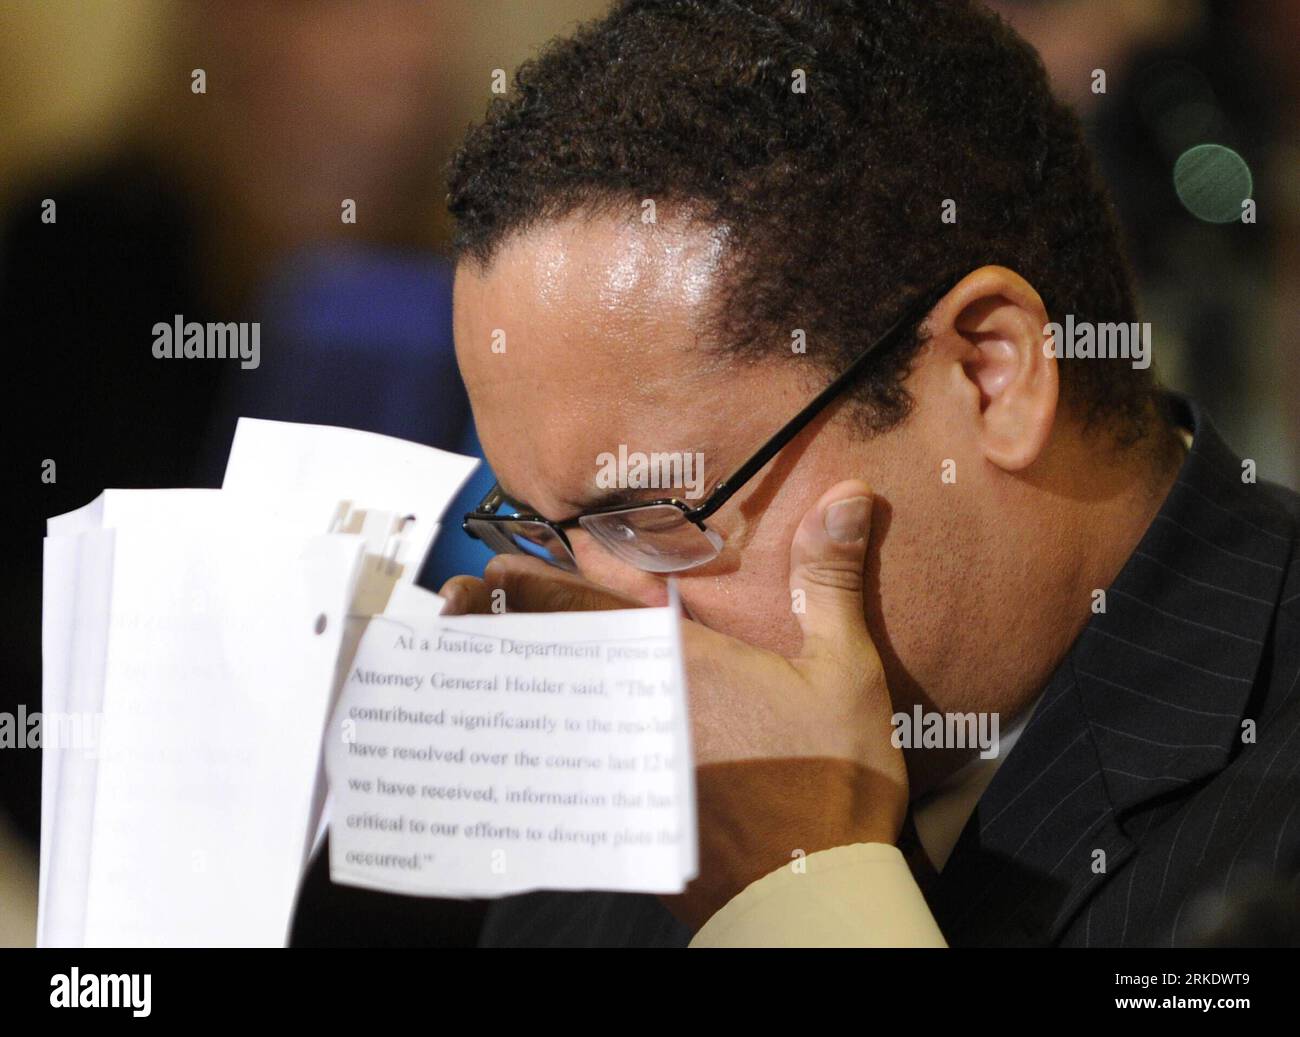 Bildnummer: 55012745  Datum: 10.03.2011  Copyright: imago/Xinhua WASHINGTON D.C., March 10, 2011 (Xinhua) -- U.S. Representative Keith Ellison, a Democrat from Minnesota, becomes emotional as he testifies before the House Homeland Security Committee during a hearing to examine The Extent of Radicalization in the American Muslim Community and that Community s Response on Capitol Hill in Washington D.C., capital of the United States, March 10, 2011. (Xinhua/Zhang Jun) (wjd) US-HEARING-AMERICAN MUSLIM COMMUNITY PUBLICATIONxNOTxINxCHN People Politik kbdig xkg 2011 quer o0 pessimistisch weinen Anhö Stock Photo